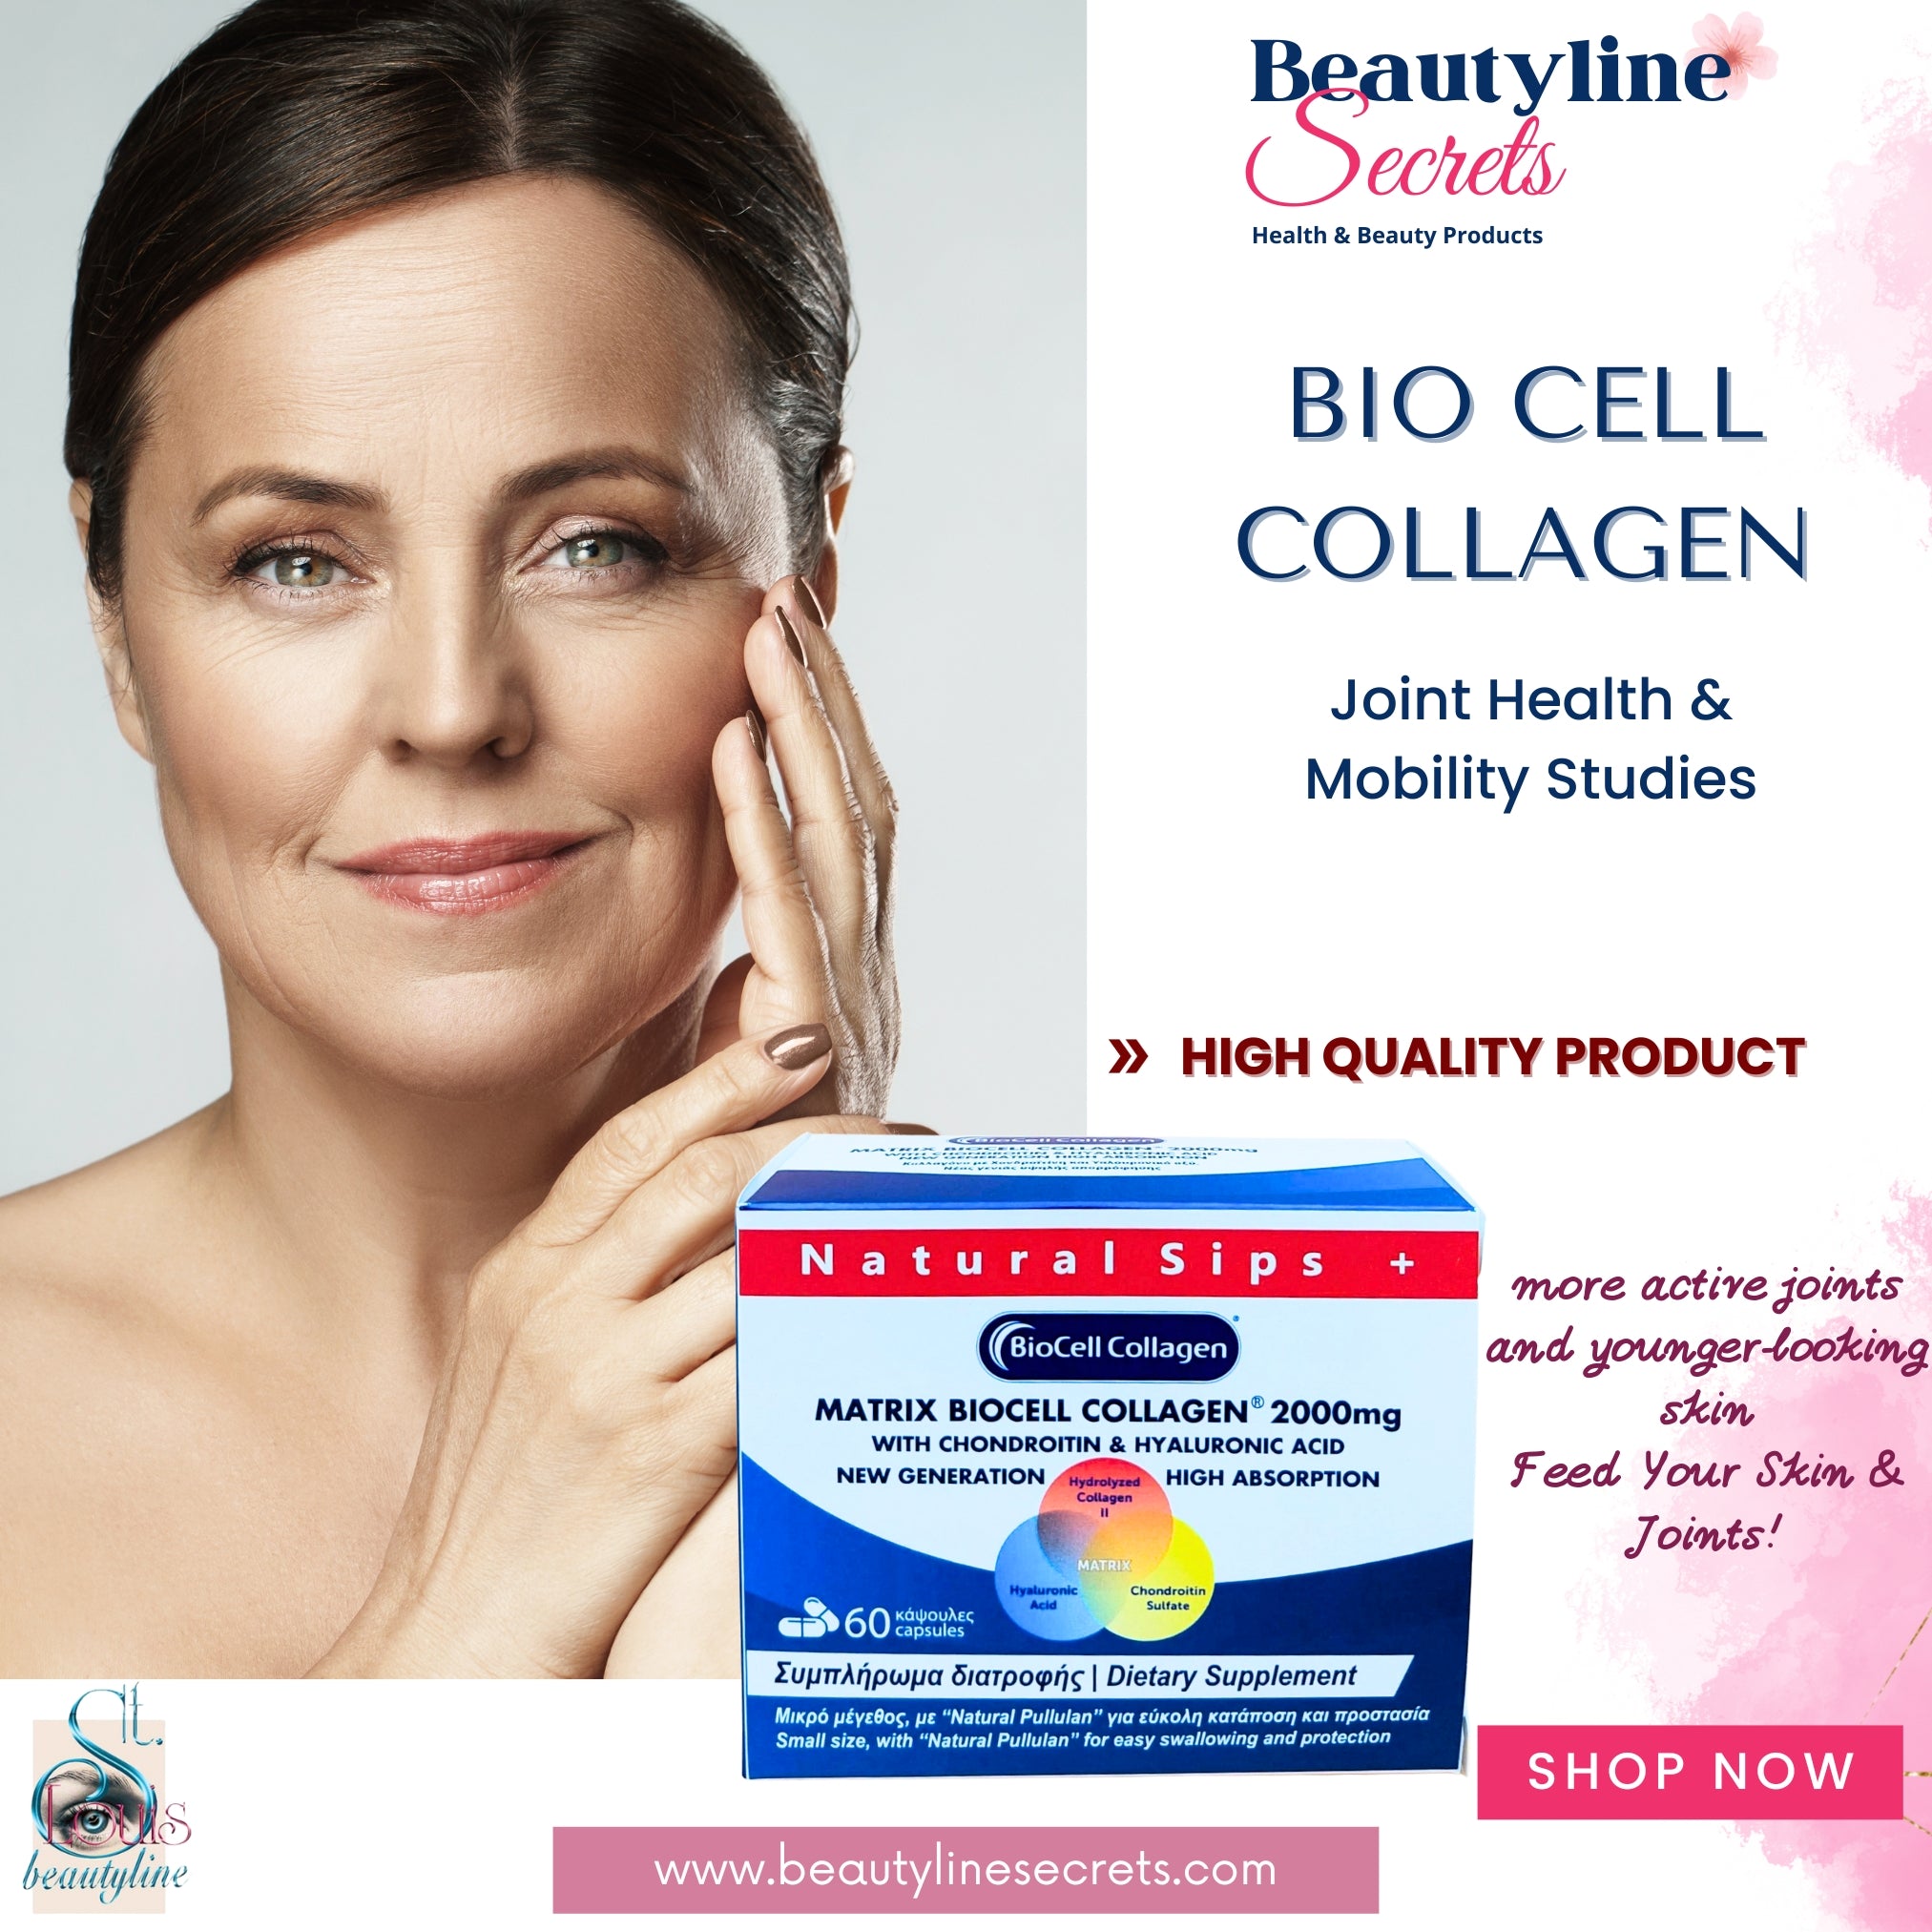 Bio Cell Collagen Natural Sips+ 60 Caps